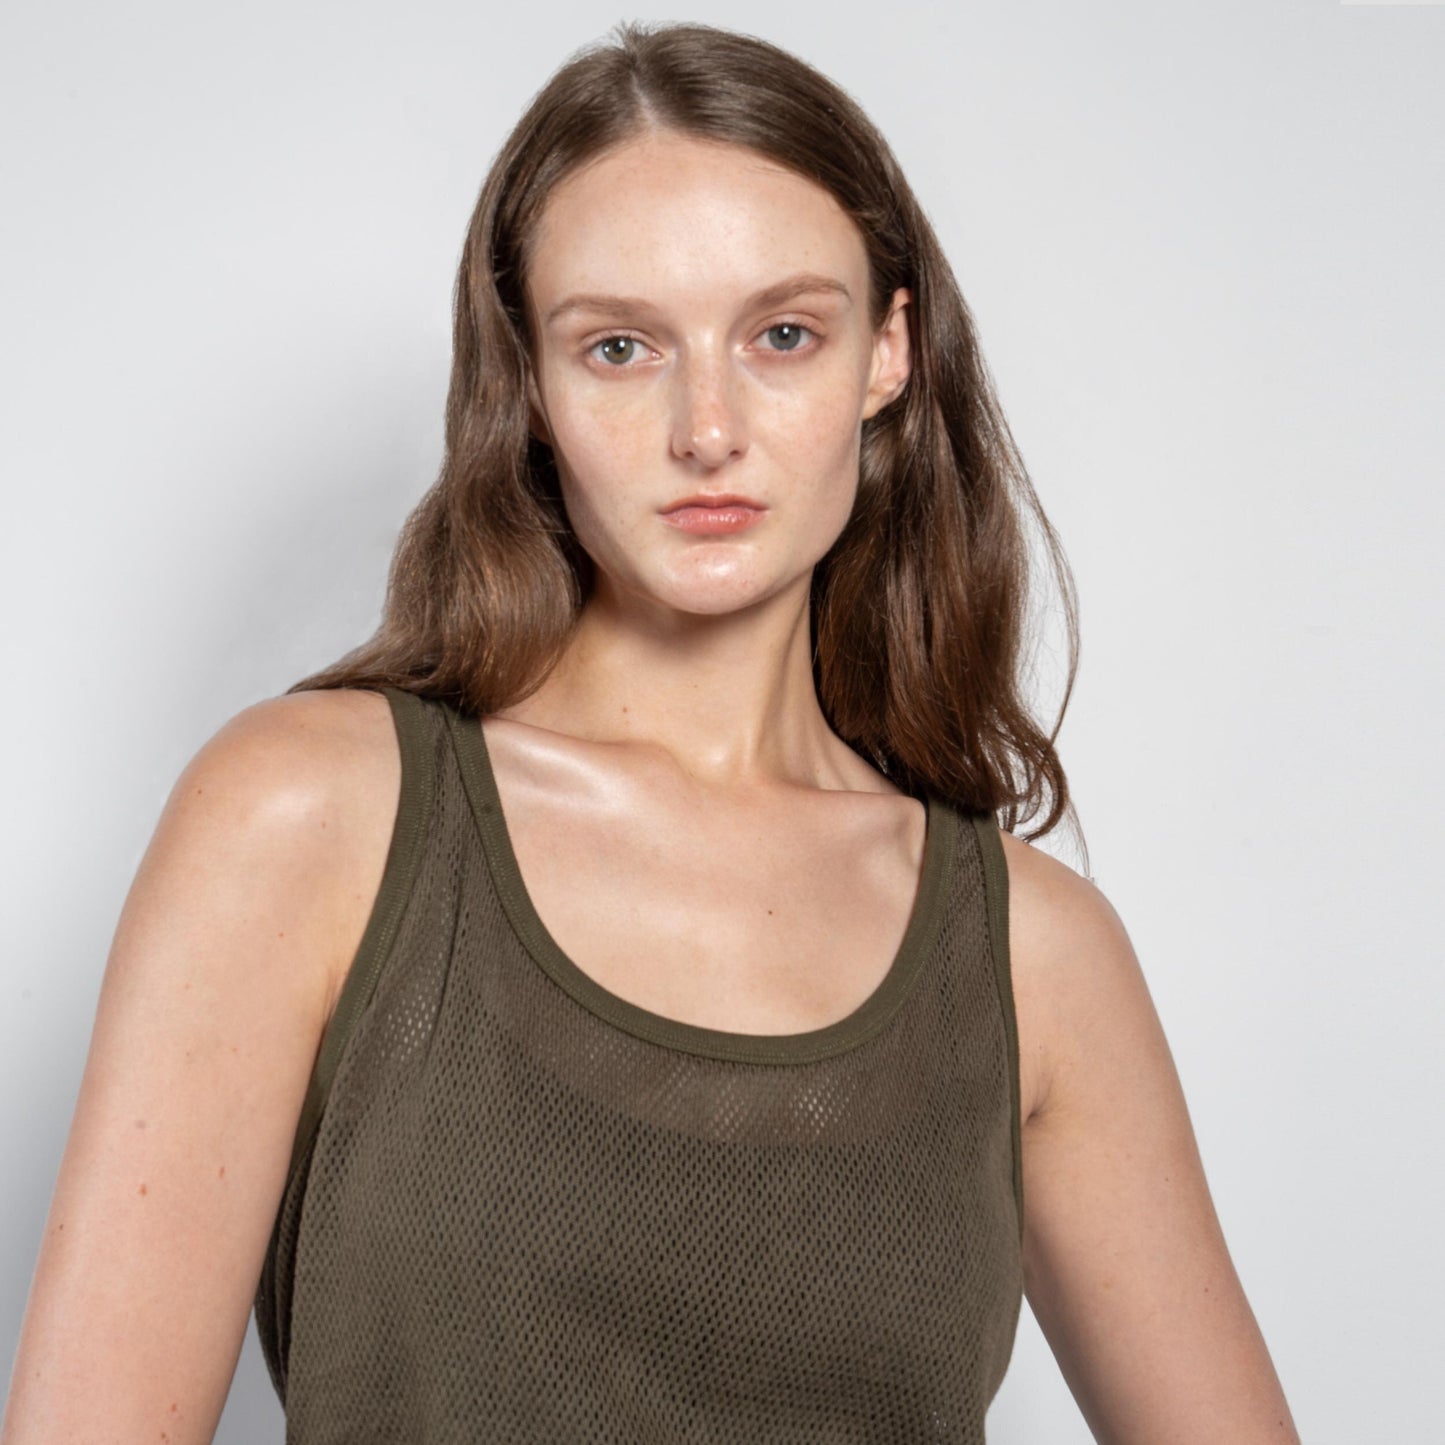 Cotton Mesh Tank Top in Drab Olive